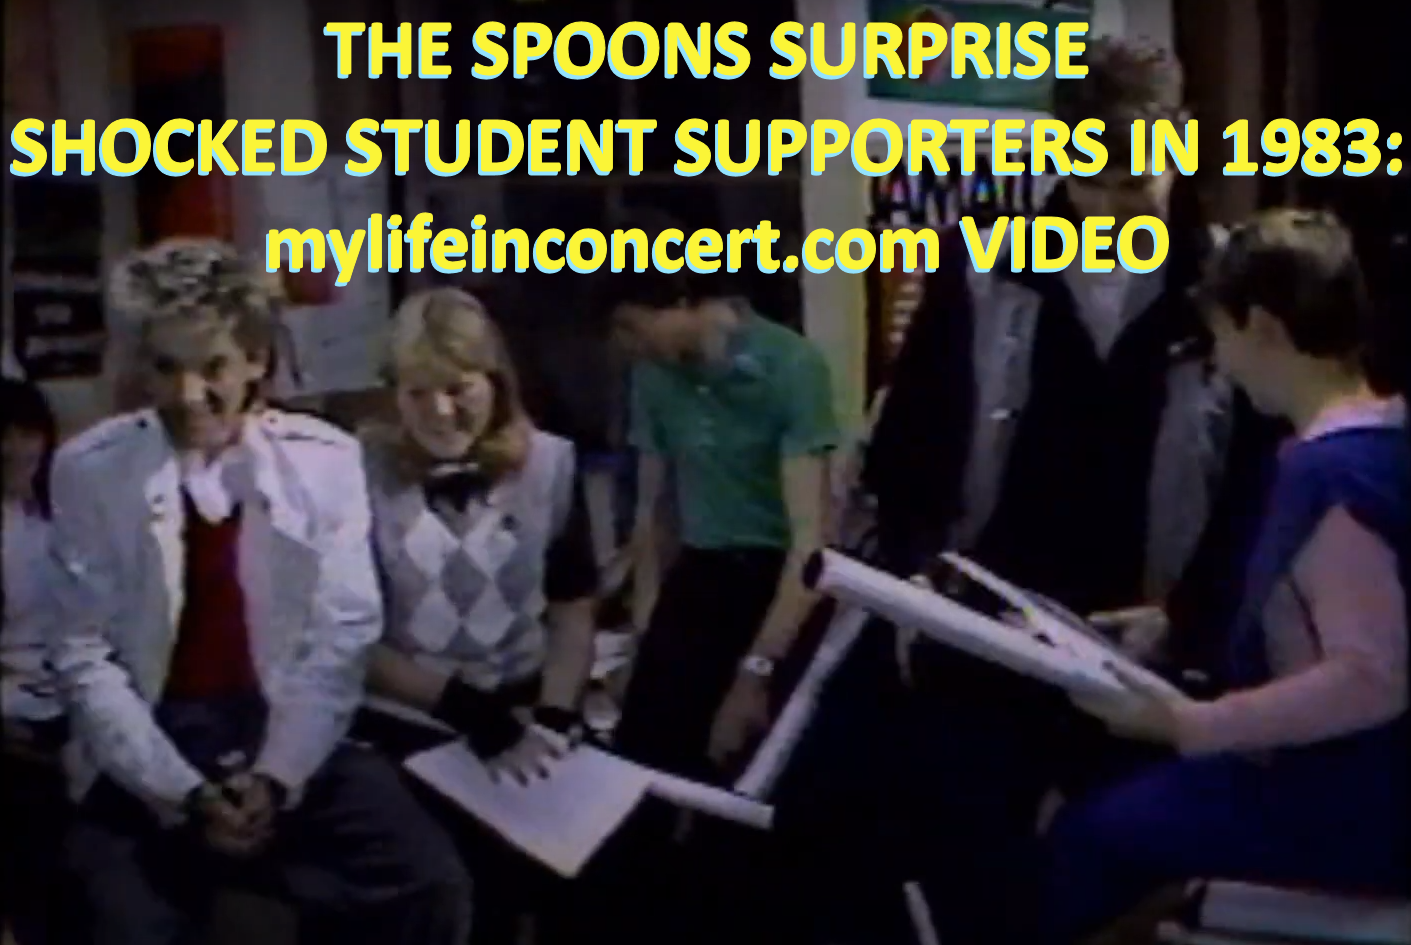 The Spoons Surprise Shocked Student Supporters in 1983: mylifeinconcert.com Video